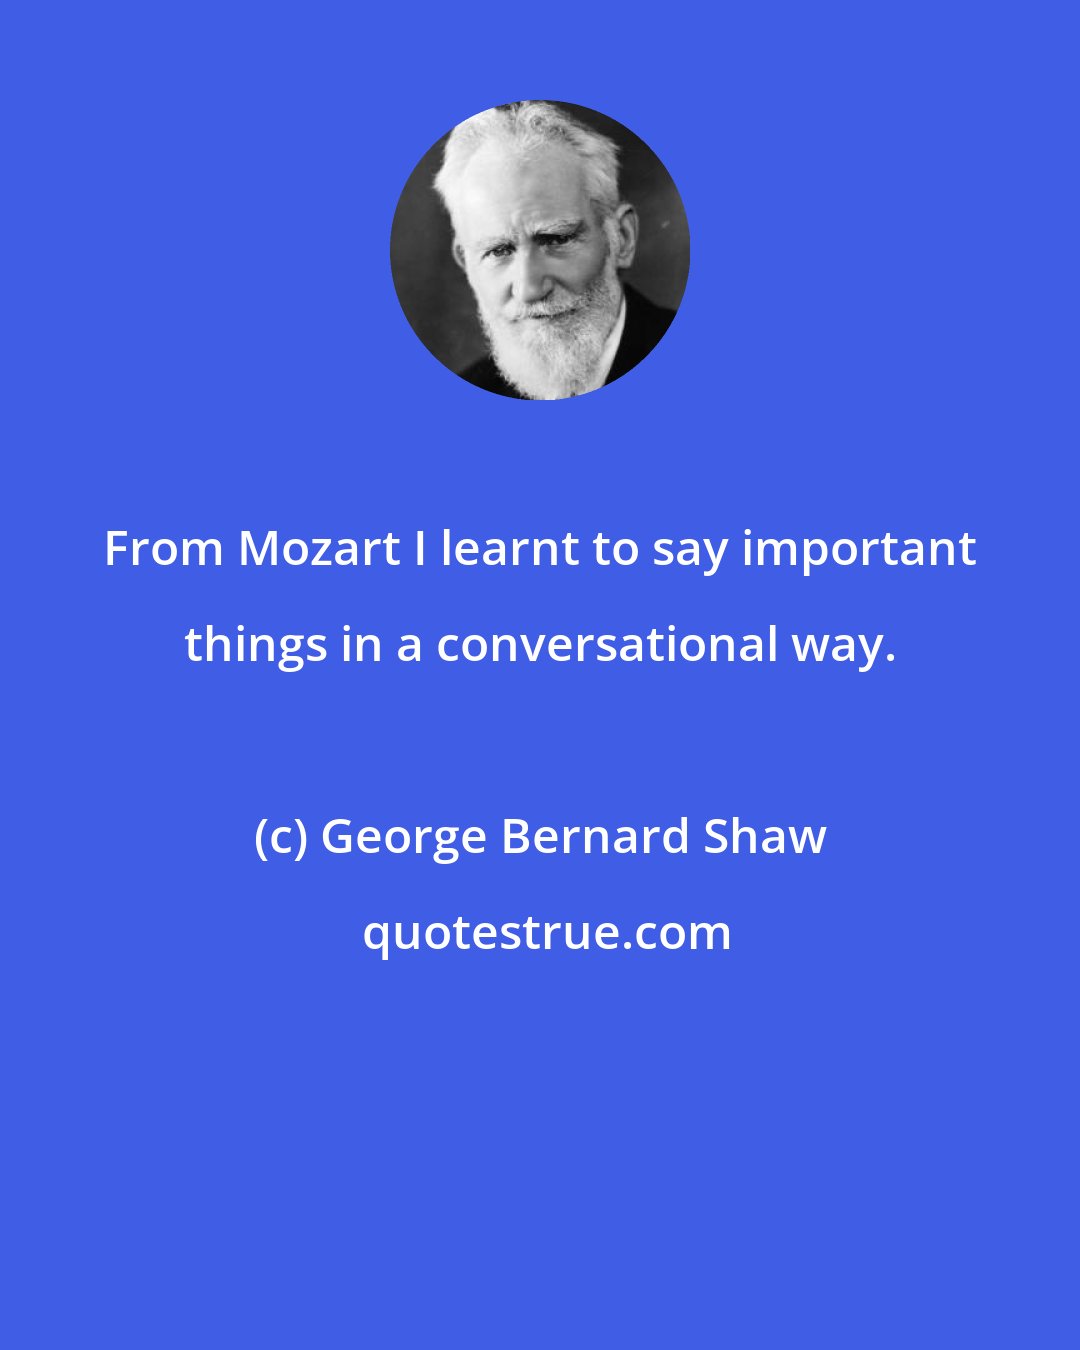 George Bernard Shaw: From Mozart I learnt to say important things in a conversational way.